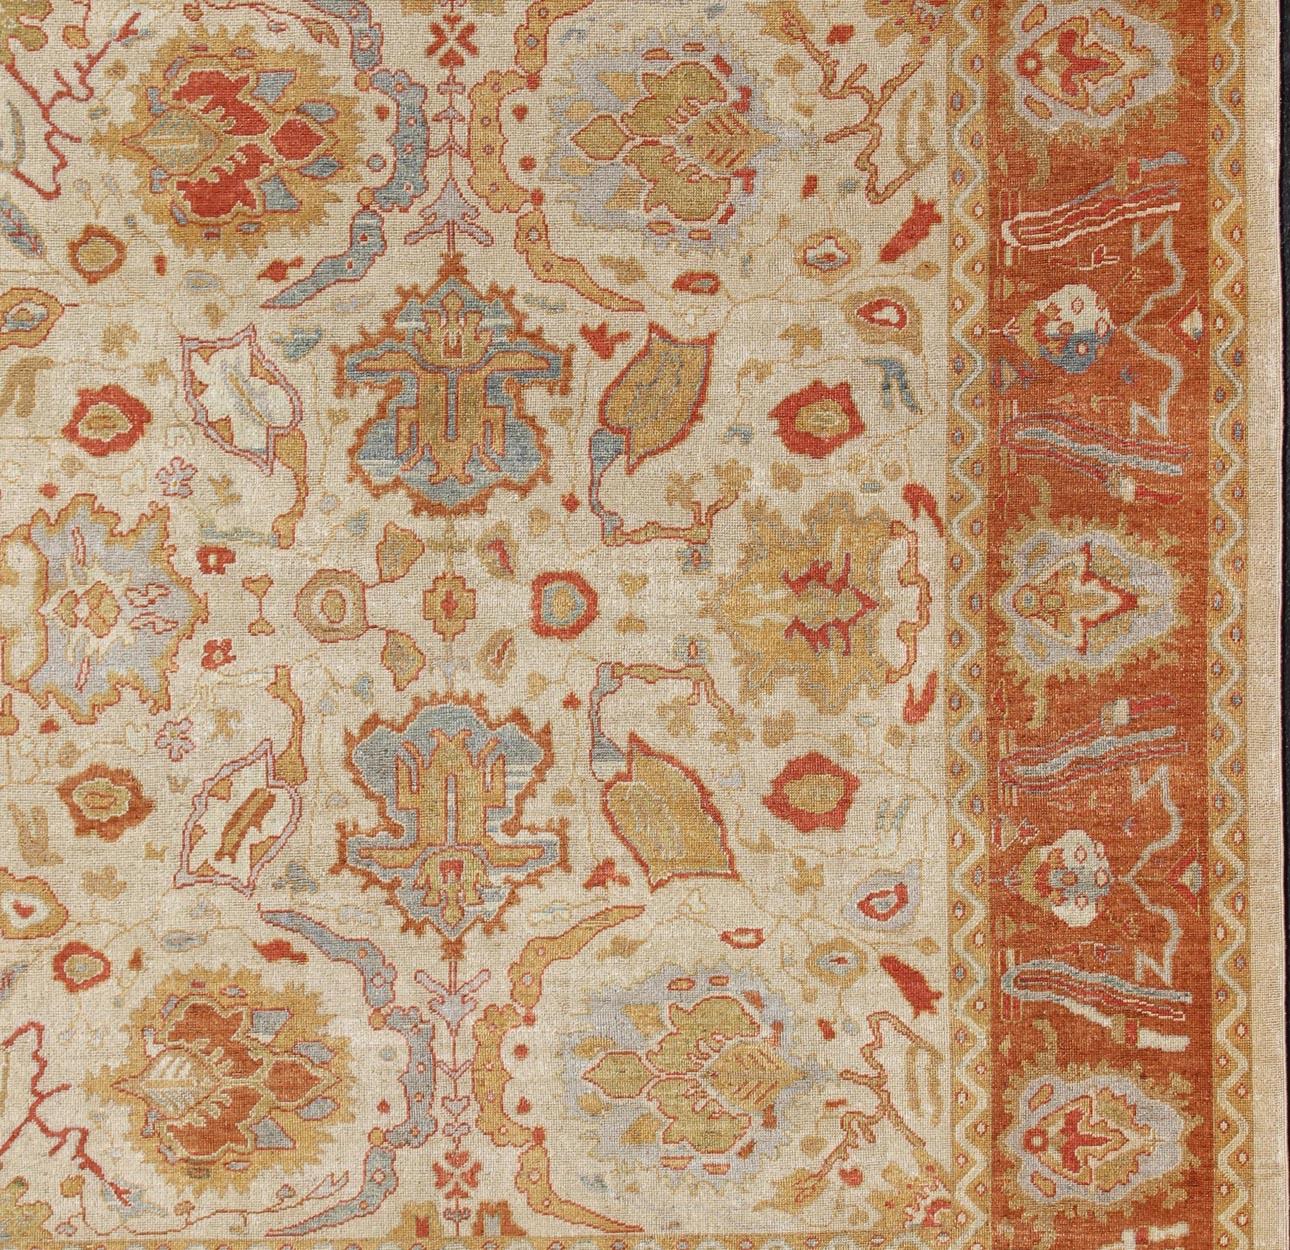 Square Turkish Oushak Rug with Angora Wool, country of origin / type: Turkey / Oushak, circa Early-21st Century.

Measures: 12' x 13'10. 

This lovely Oushak rug was woven in Turkey; the emphasis with these rugs is on their colors, which in this